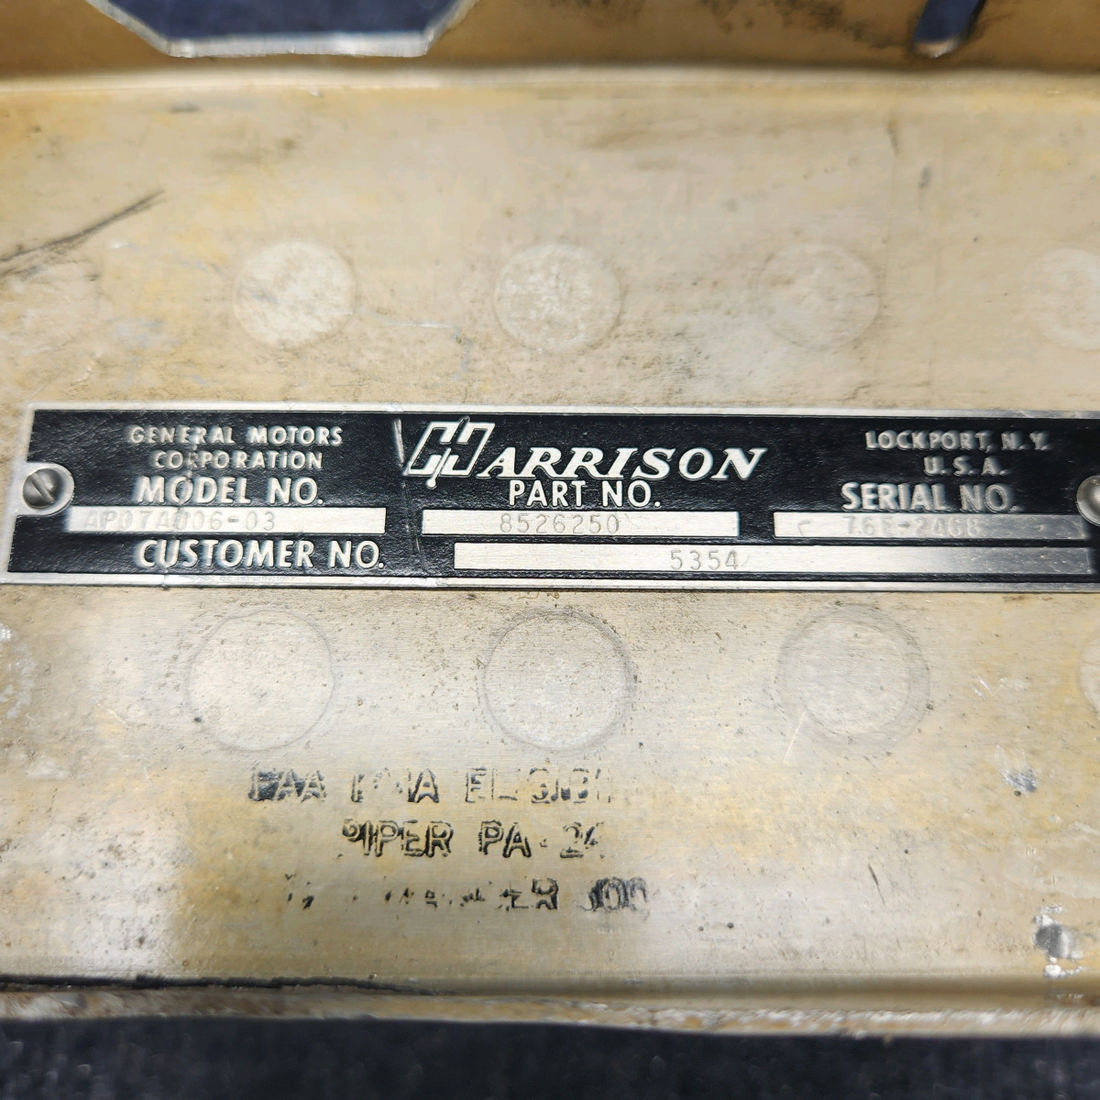 Used aircraft parts for sale, 8526250 Lycoming Textron OIL COOLER ASSEMBLY USED